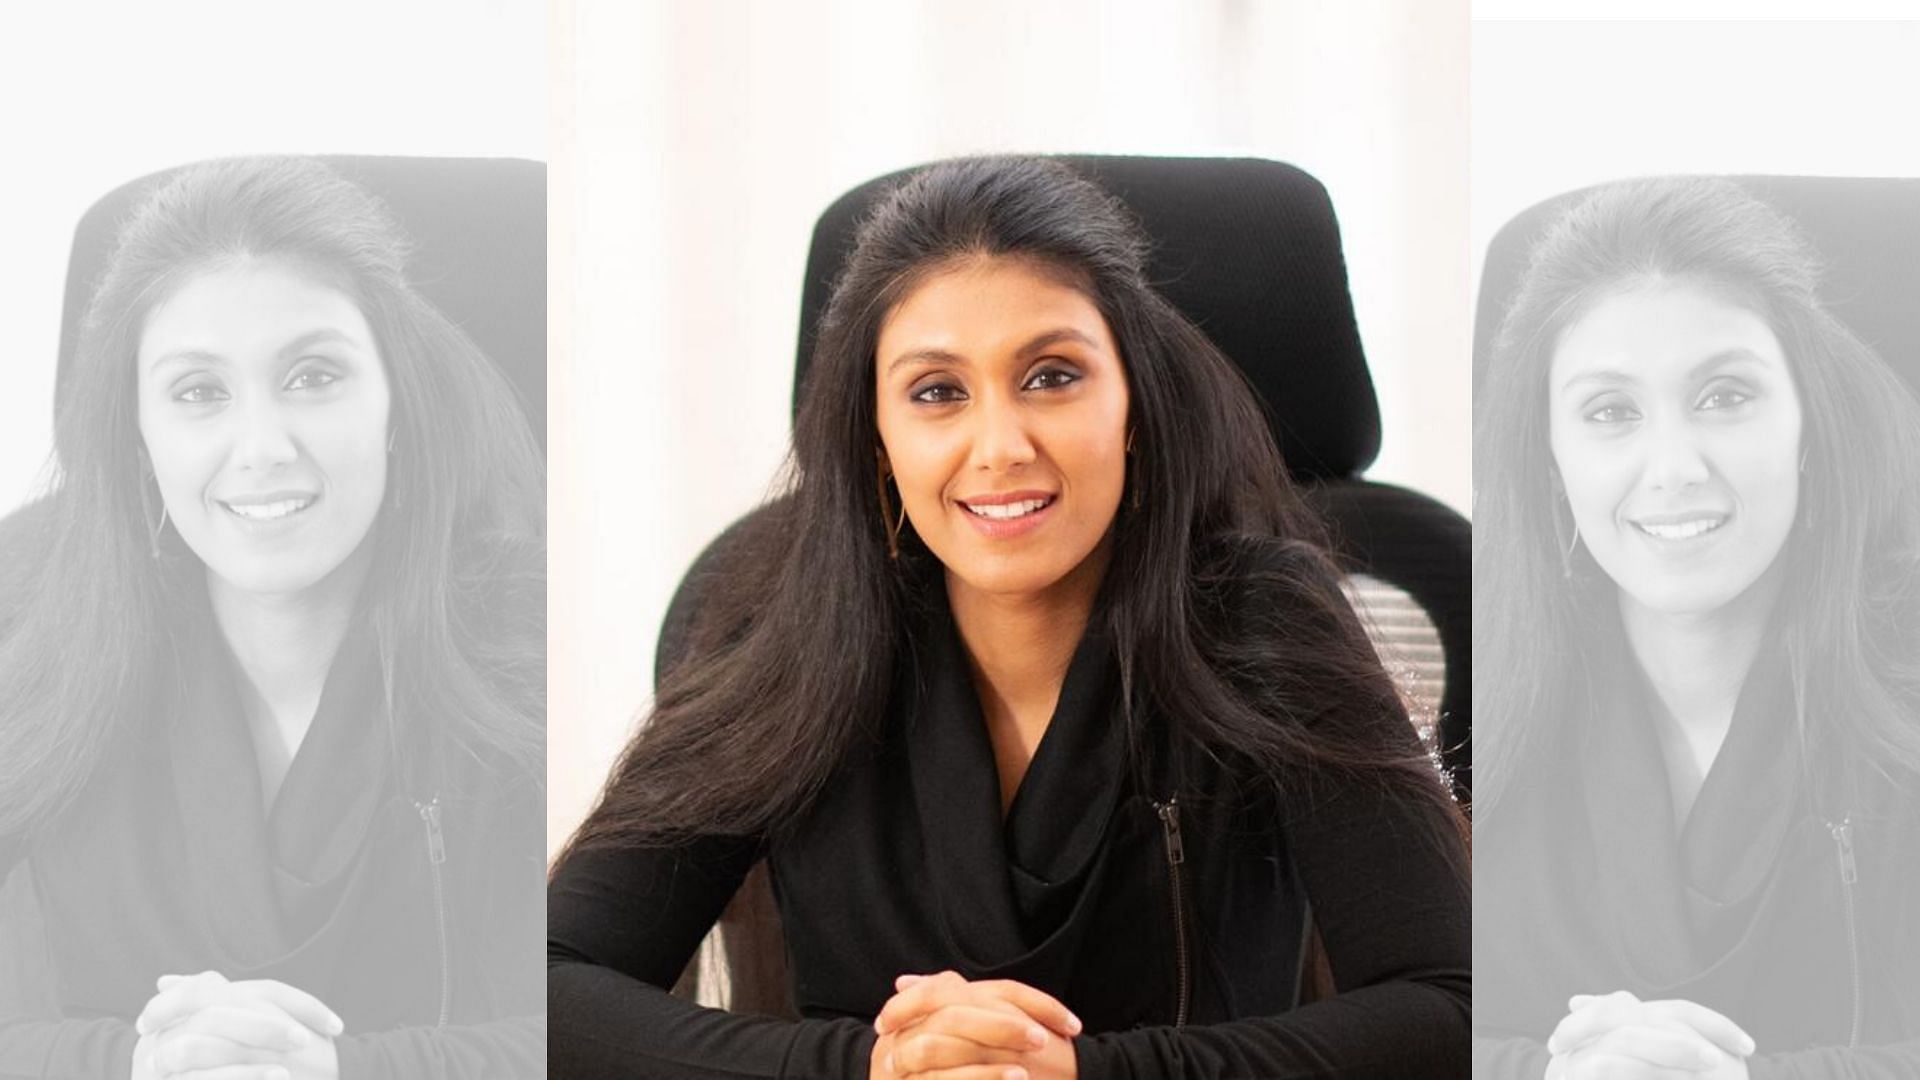 HCL Technologies on Friday, 17 July announced that Roshni Nadar Malhotra, the daughter of the incumbent chairperson Shiv Nadar has been appointed the new chairperson of the company’s board of directors with immediate effect.